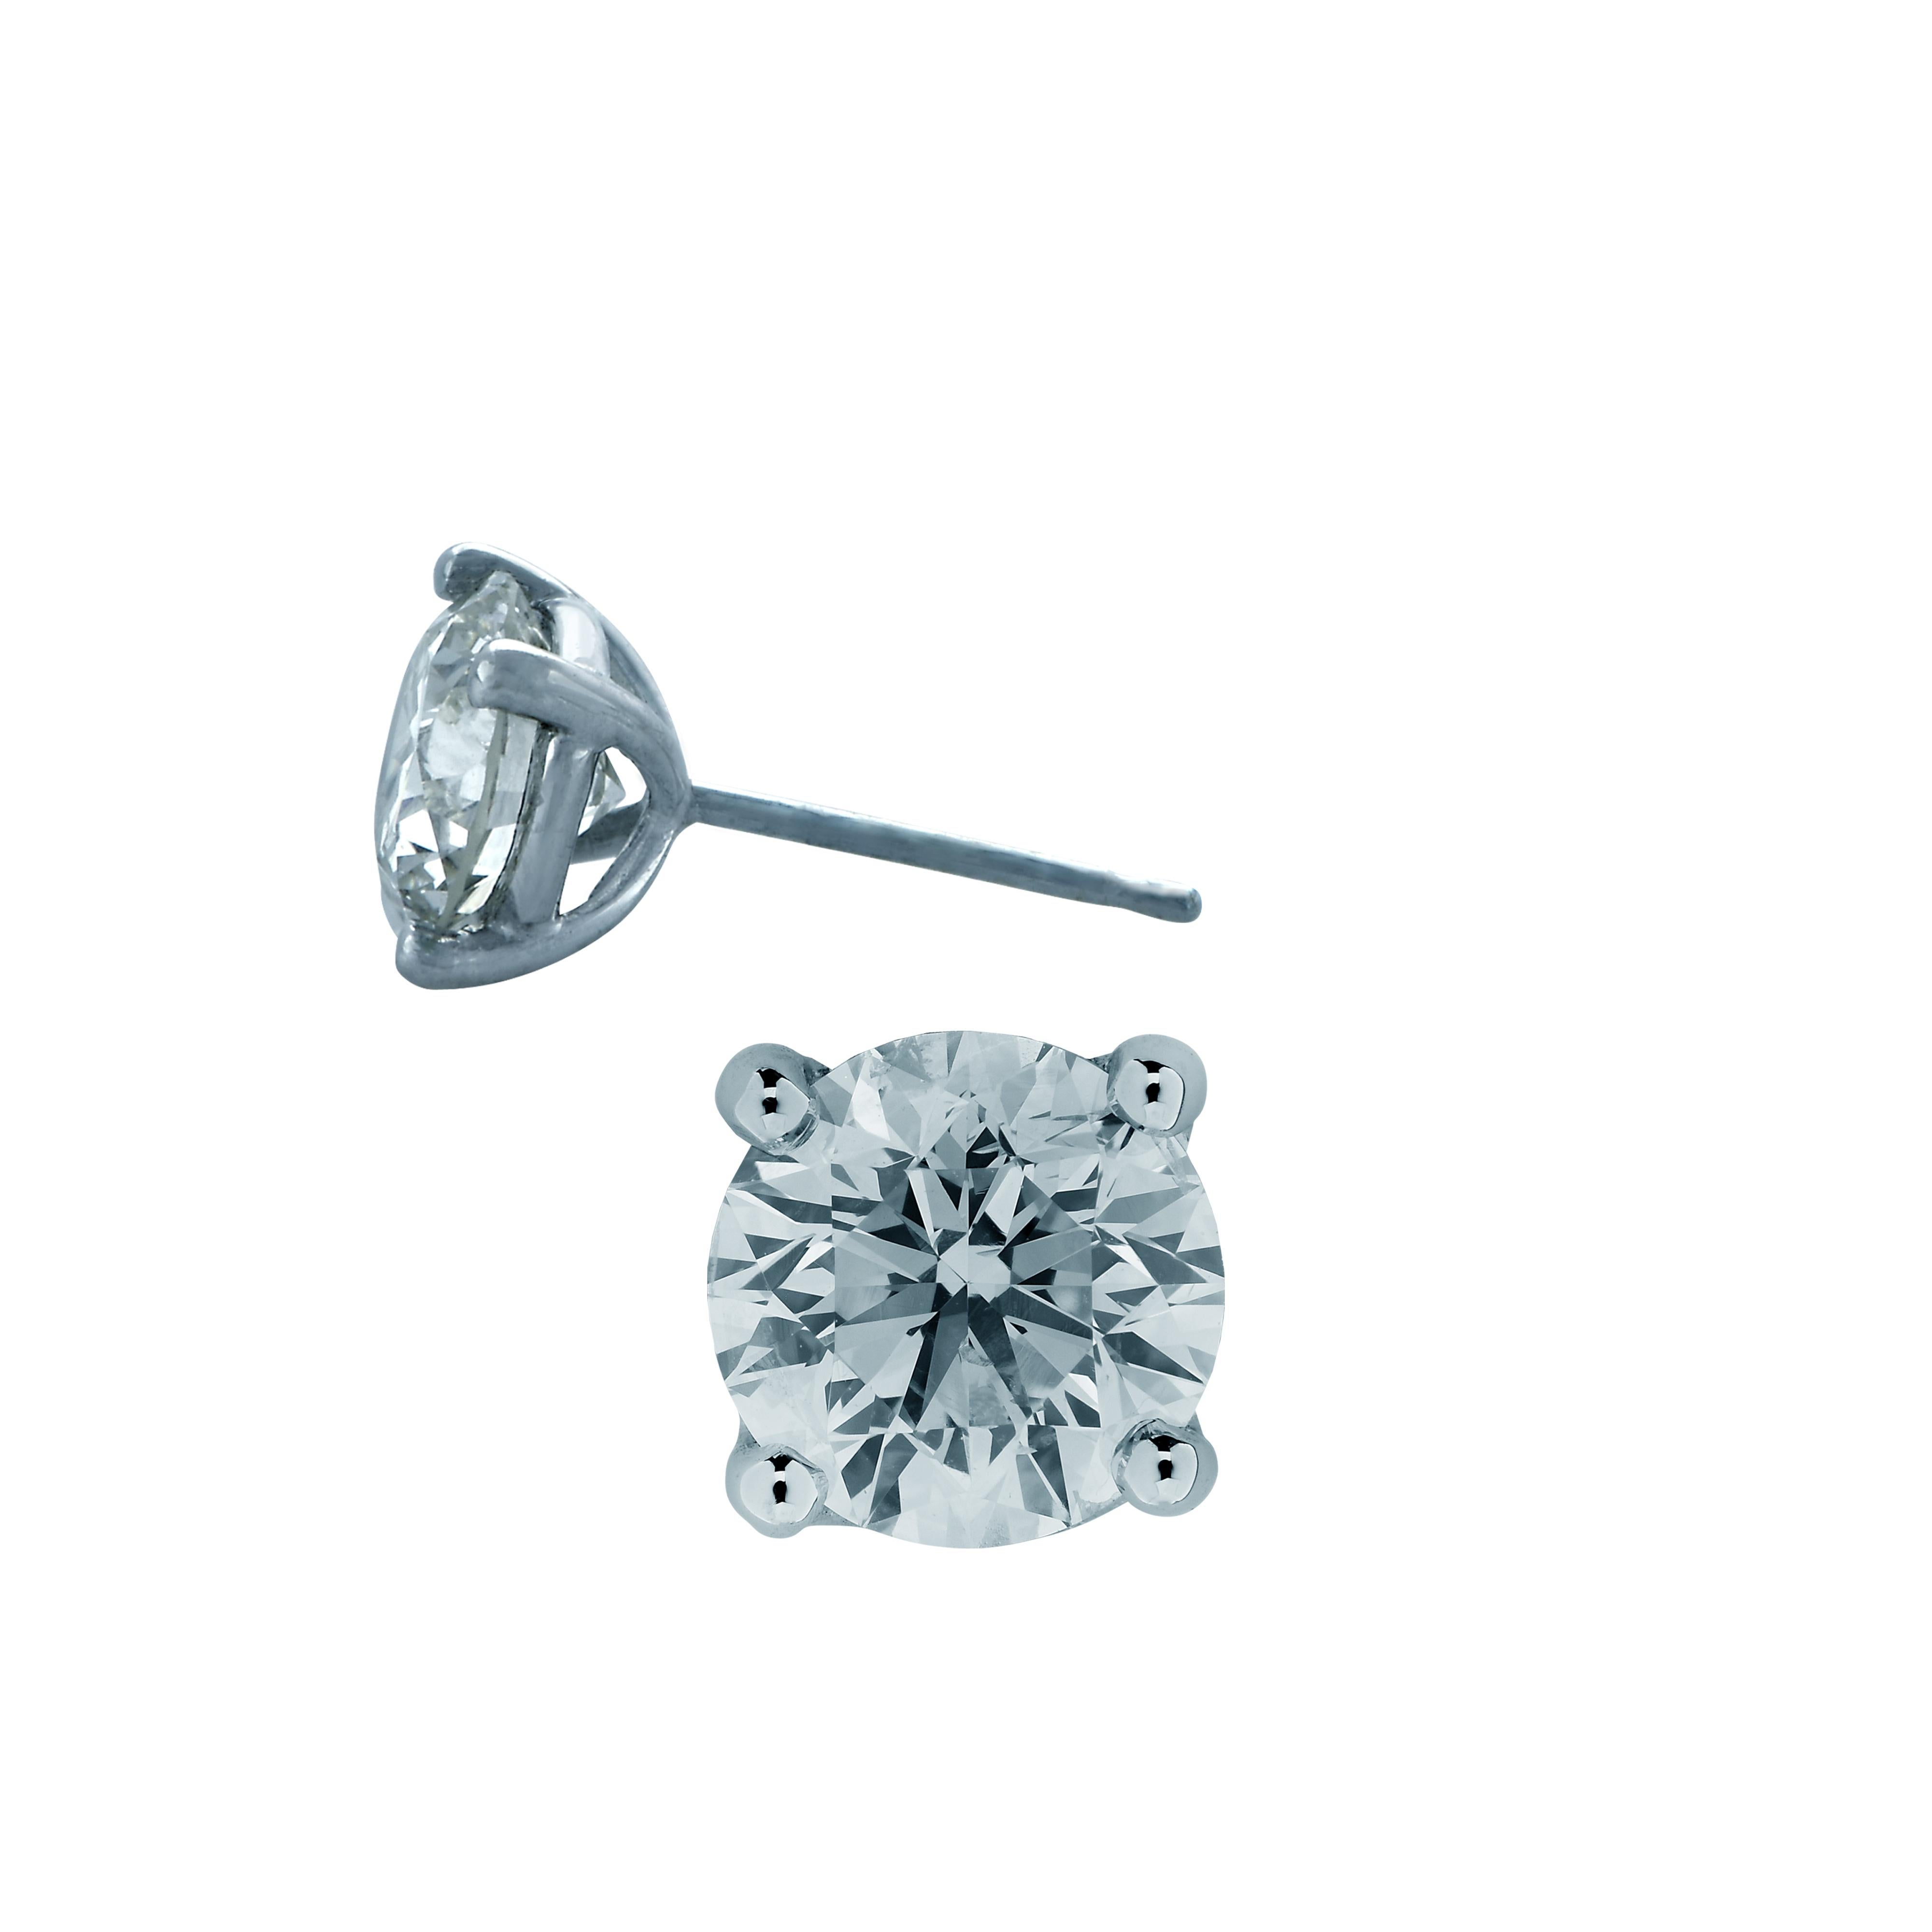 Stunning solitaire stud earrings crafted in 18 karat white gold, showcasing 2 round brilliant cut diamonds weighing 1.46 carats total, F color SI clarity. These gorgeous earrings are classic and timelessly elegant.

Our pieces are all accompanied by